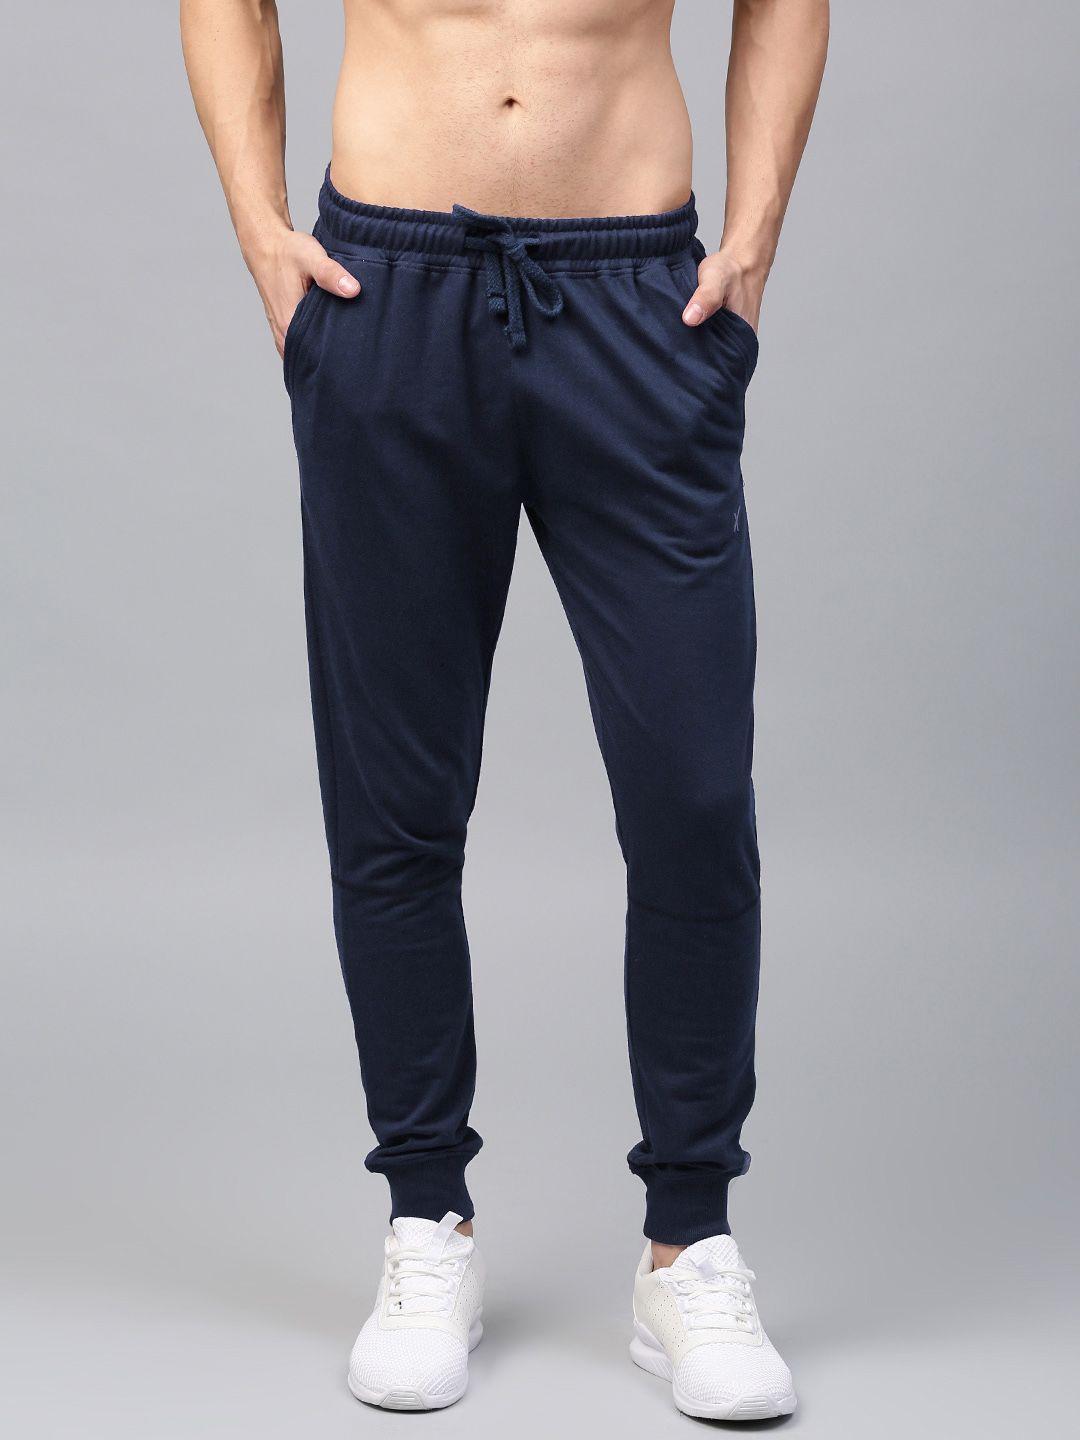 hrx active by hrithik roshan navy blue solid joggers